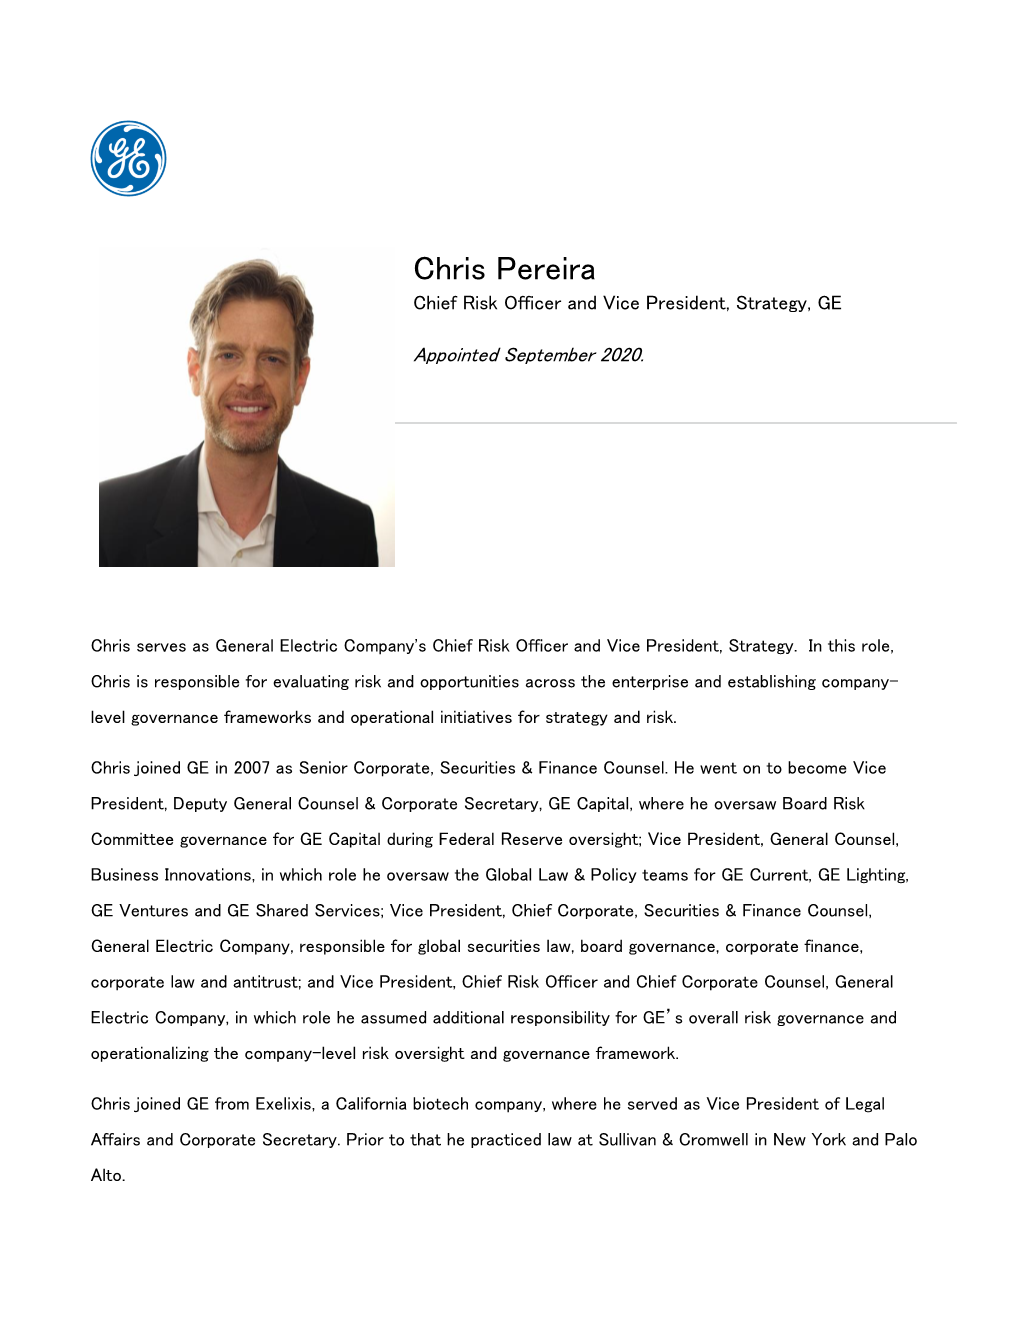 Chris Pereira Chief Risk Officer and Vice President, Strategy, GE